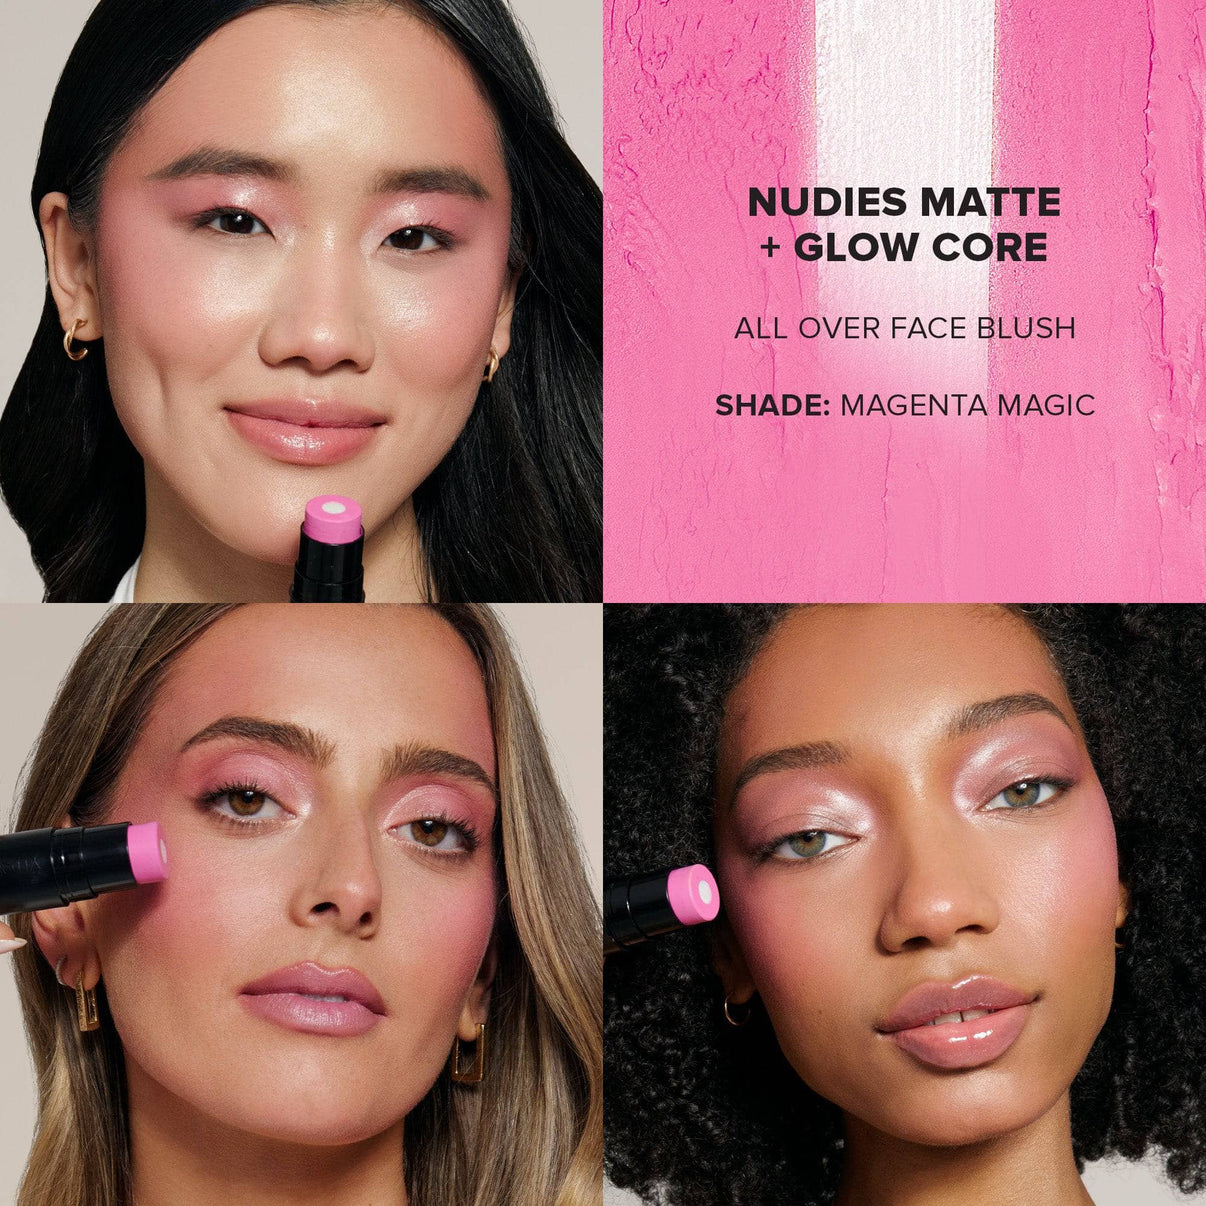 Grid with models wearing magenta magic from The Ultimate Blush & Glow Set